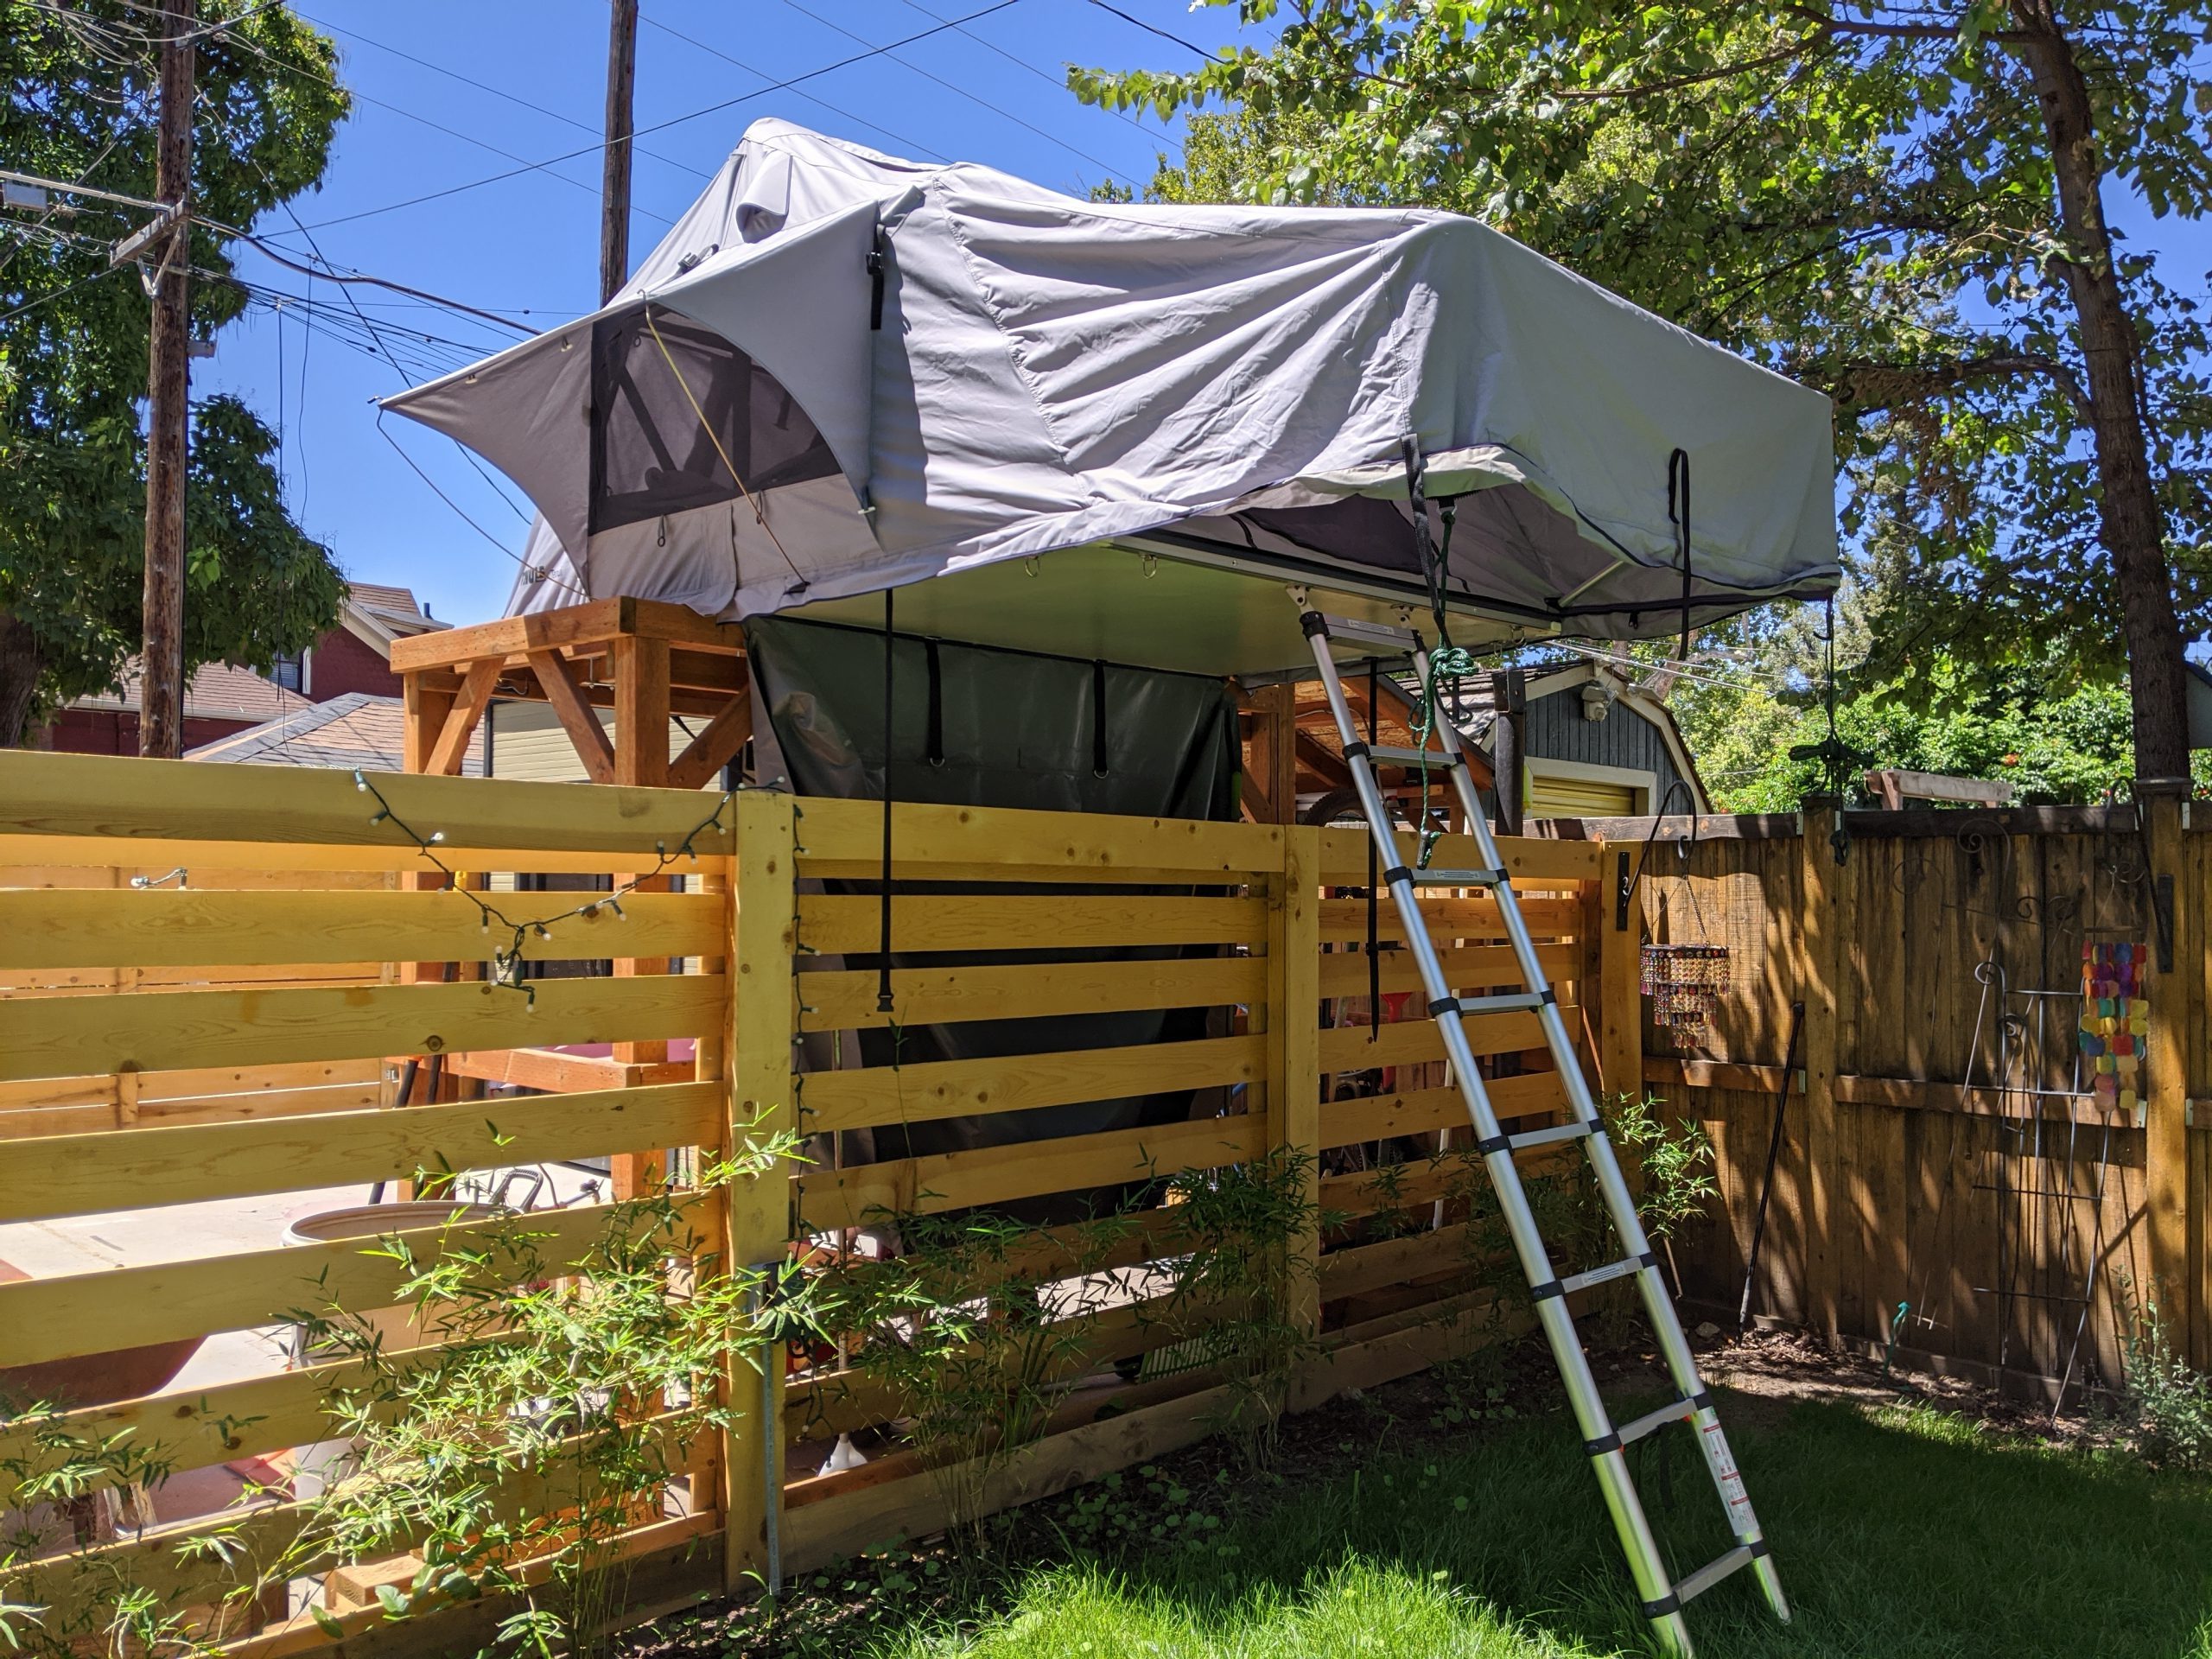 Backyard Micro-Adventure Camping with a Rooftop Tent